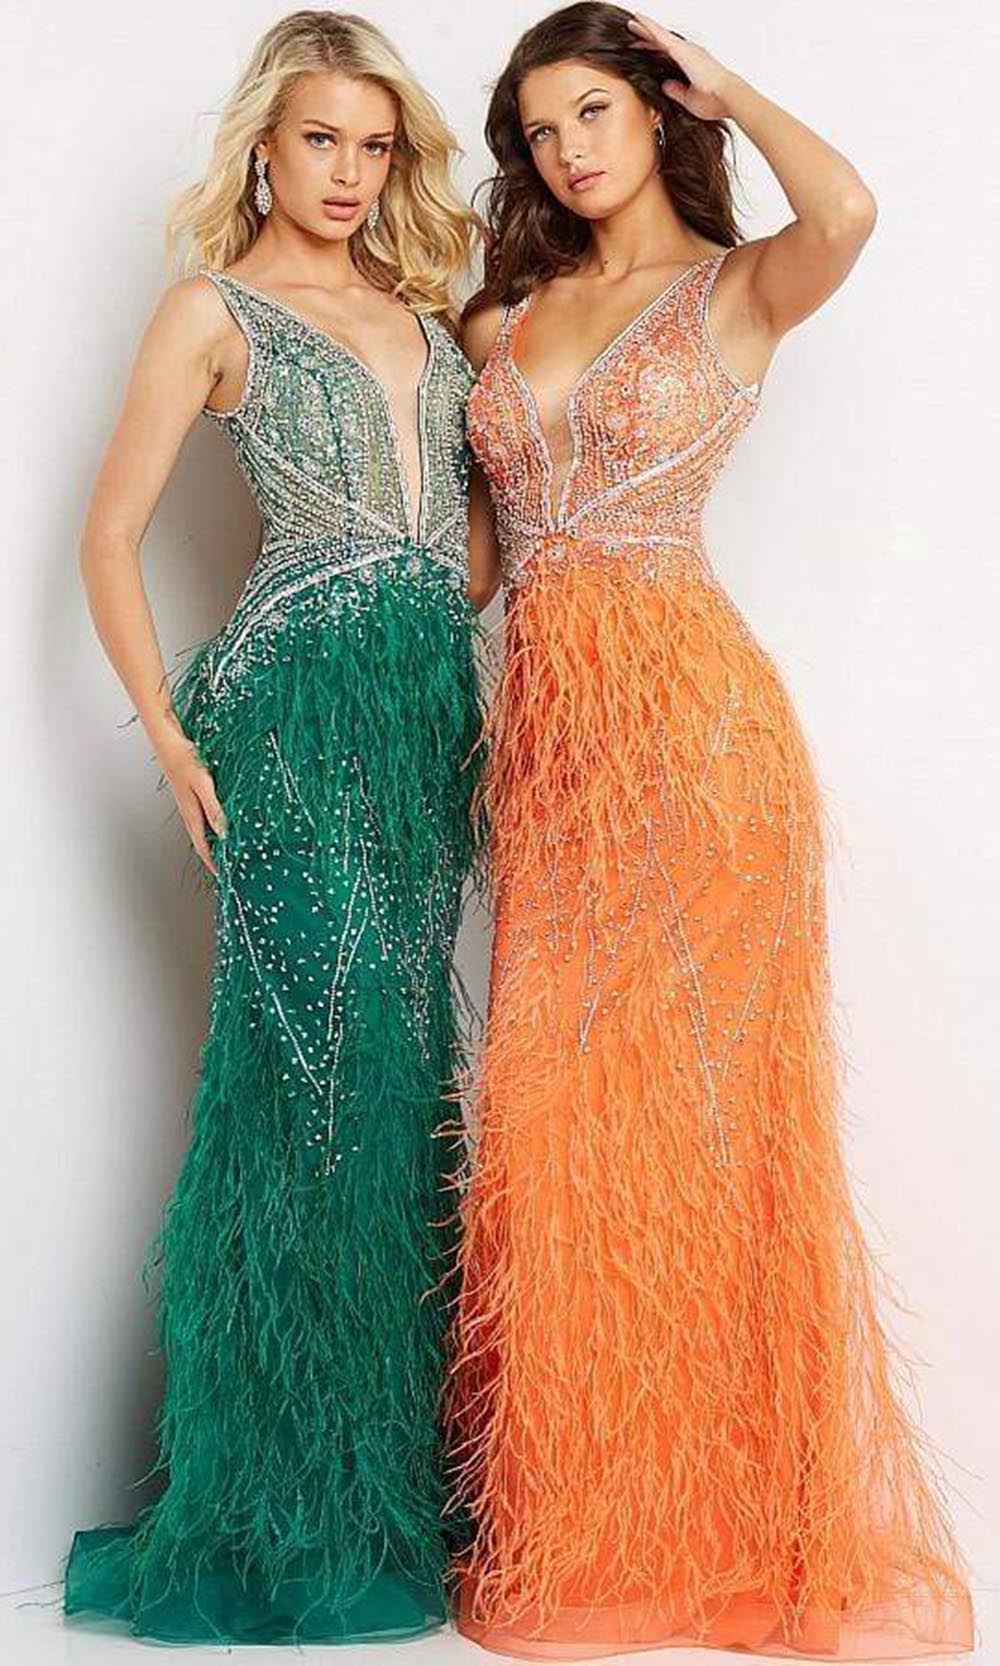 Jovani - 03023 Sheer Bodice Beaded Adorned Feather Fitted Evening Gown Prom DressesJovani - 03023 Sheer Bodice Beaded Adorned Feather Fitted Evening Gown Prom Dresses In Green and Orange